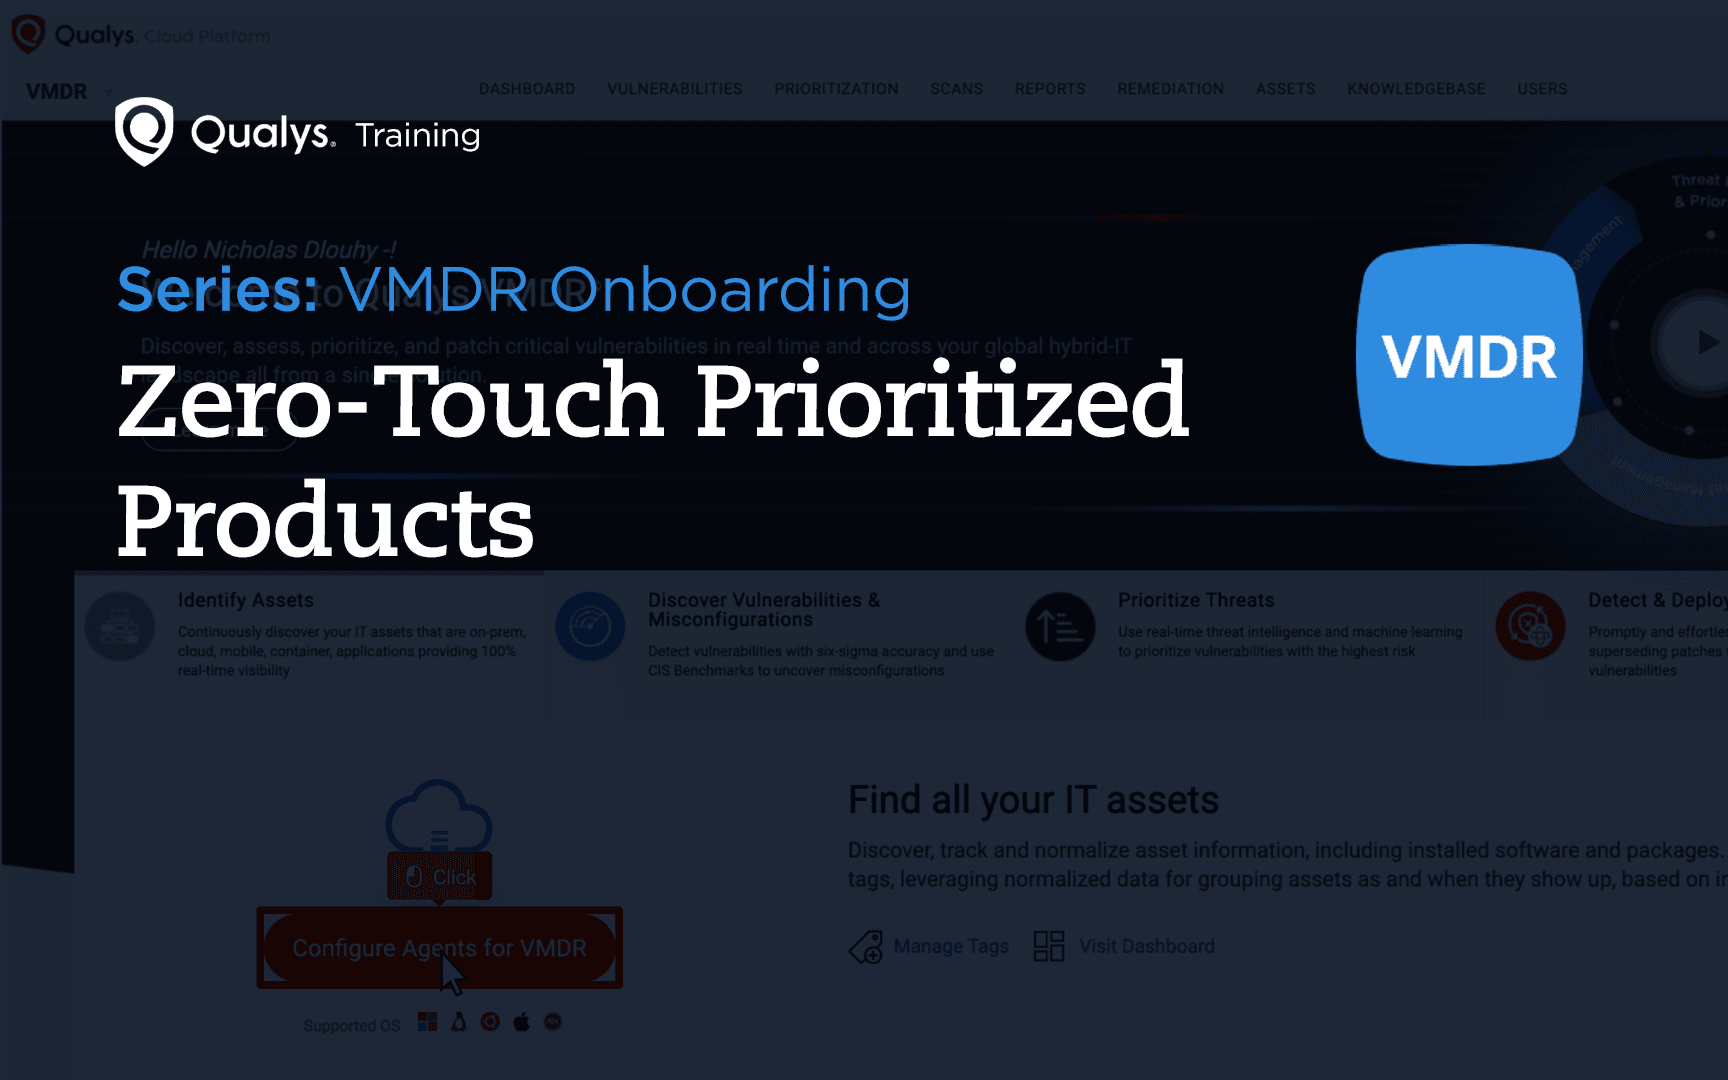 Zero-Touch Prioritized Products